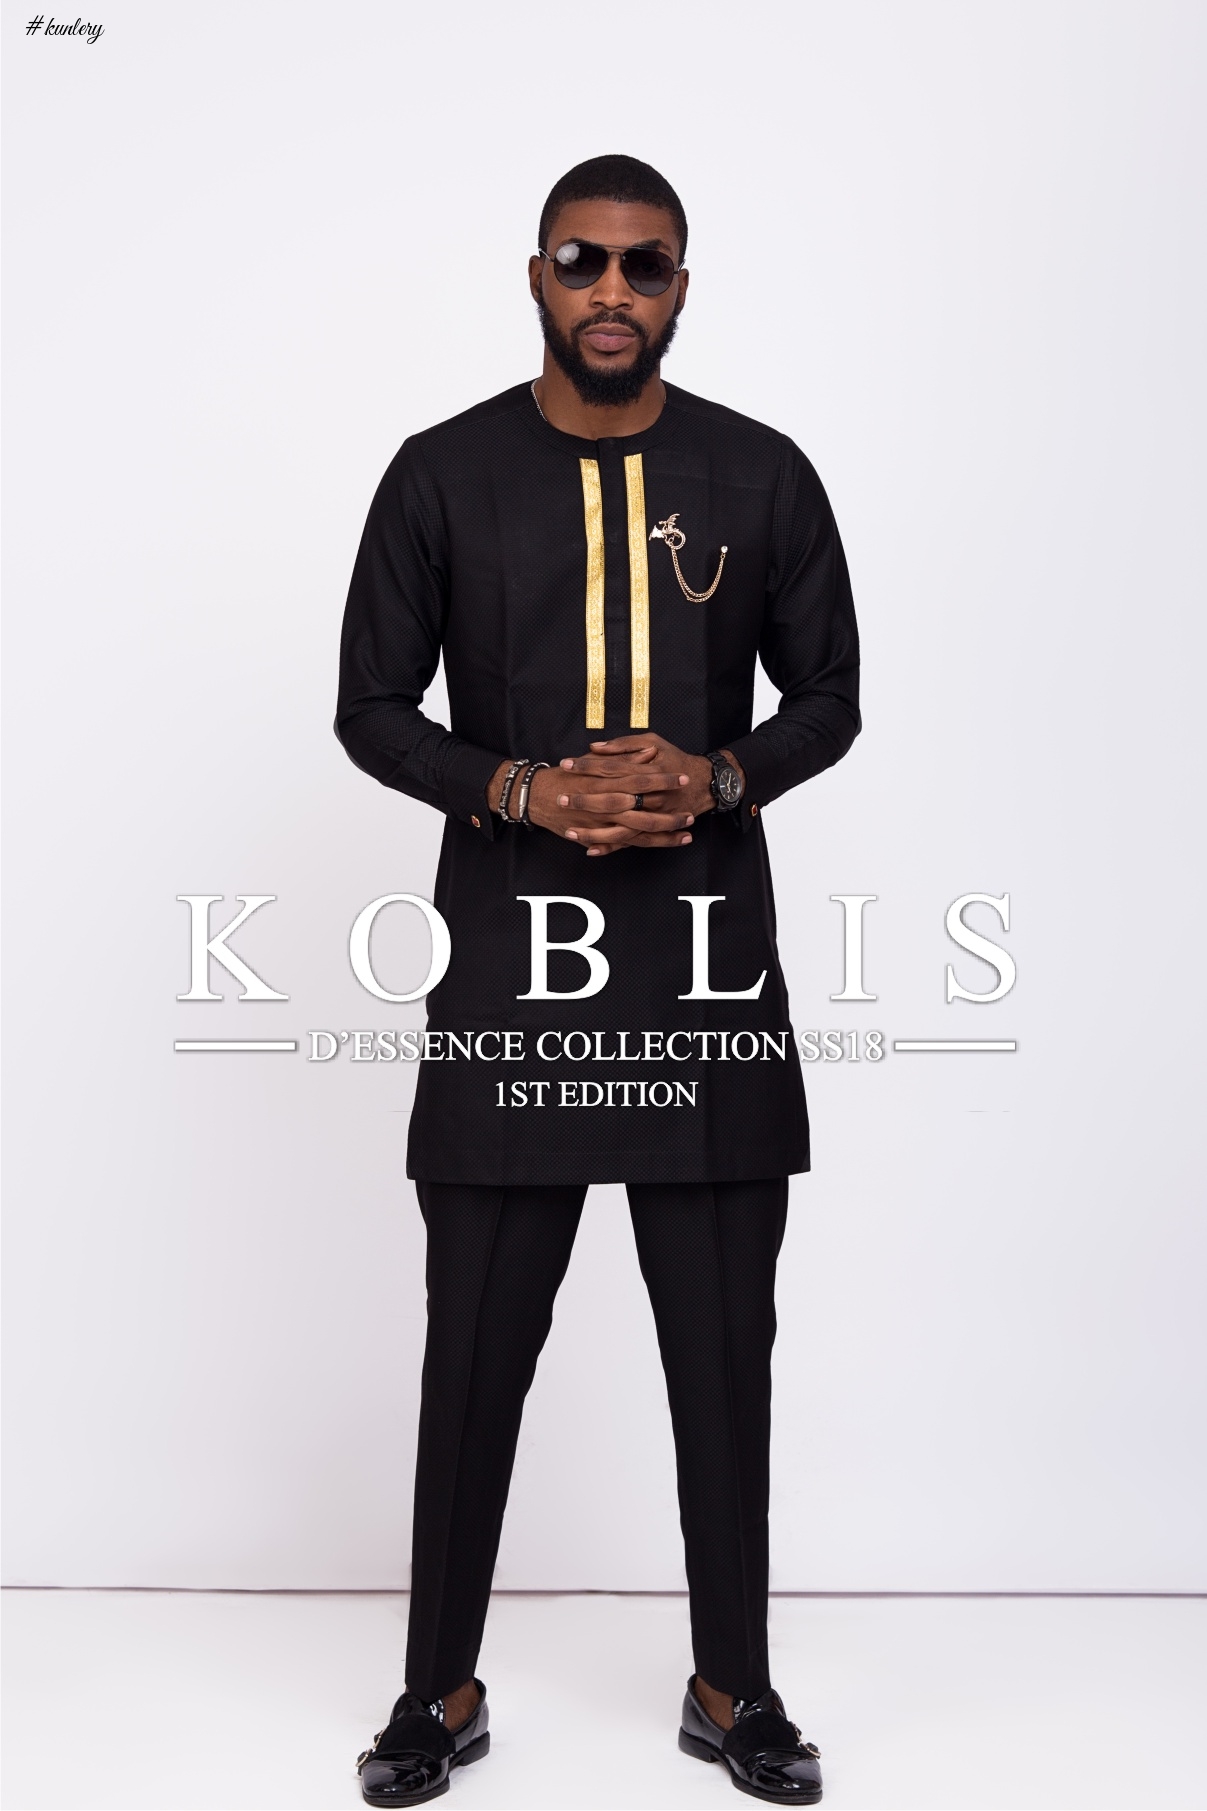 The Essence Of An African Man! Koblis Clothn Releases Fire SS18 Collection